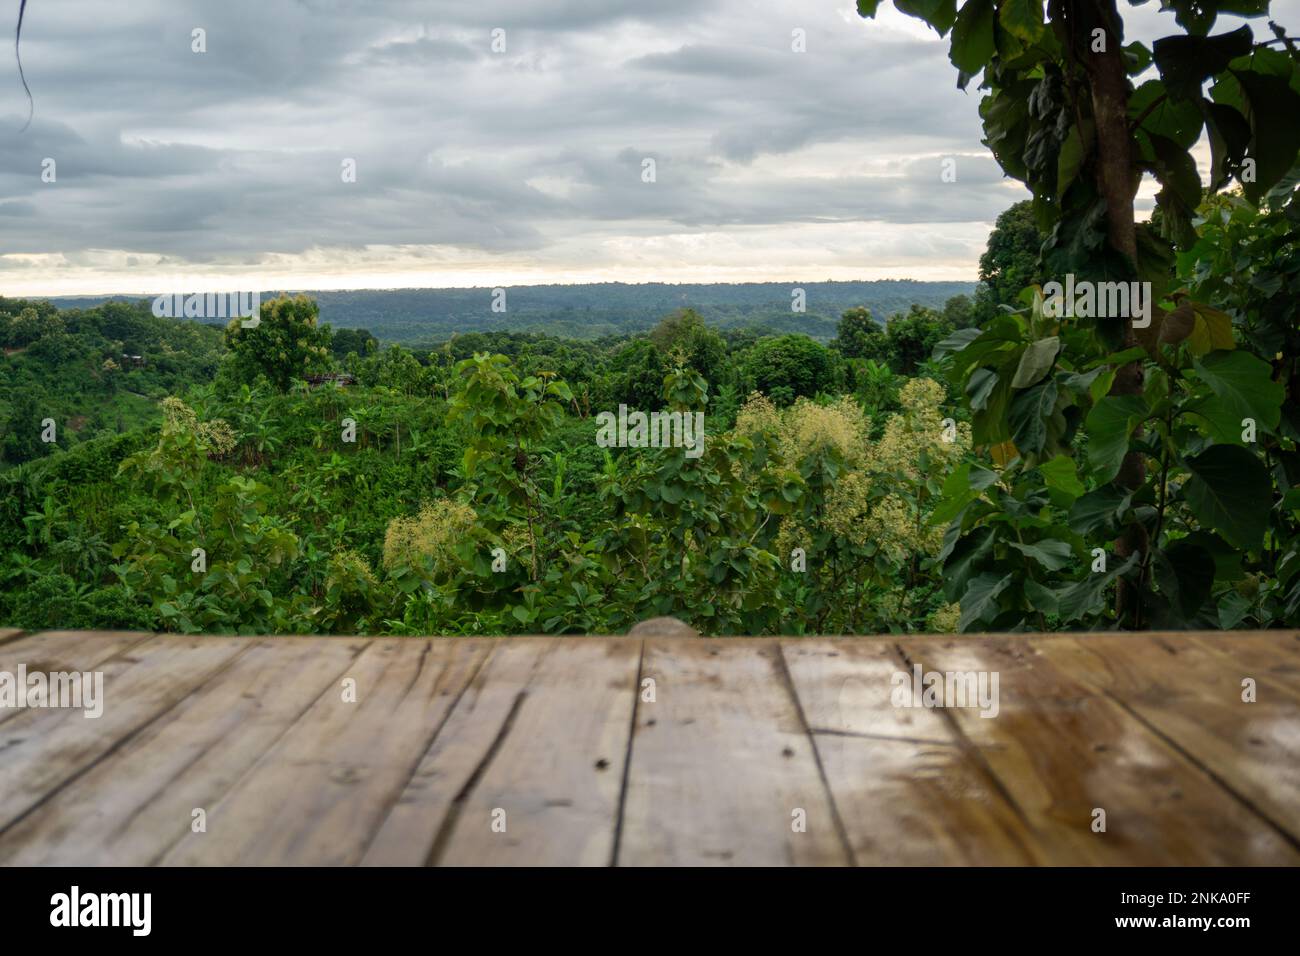 Jhum bhari is a temporary residence for living. Mountain view from Zoom house. Photo taken from Meghla, Bandarban, Chittagong, Bangladesh. Stock Photo